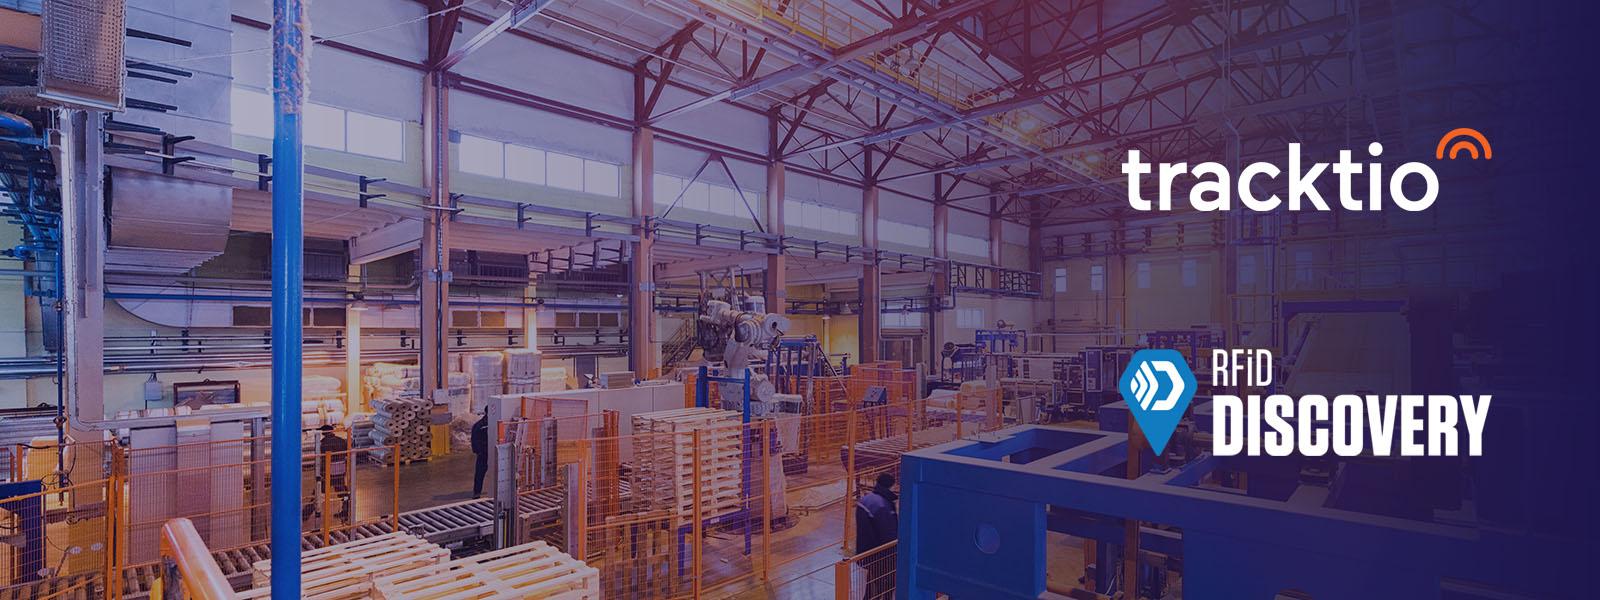 Tracktio and RFiD Discovery logos dans un environnement industriel